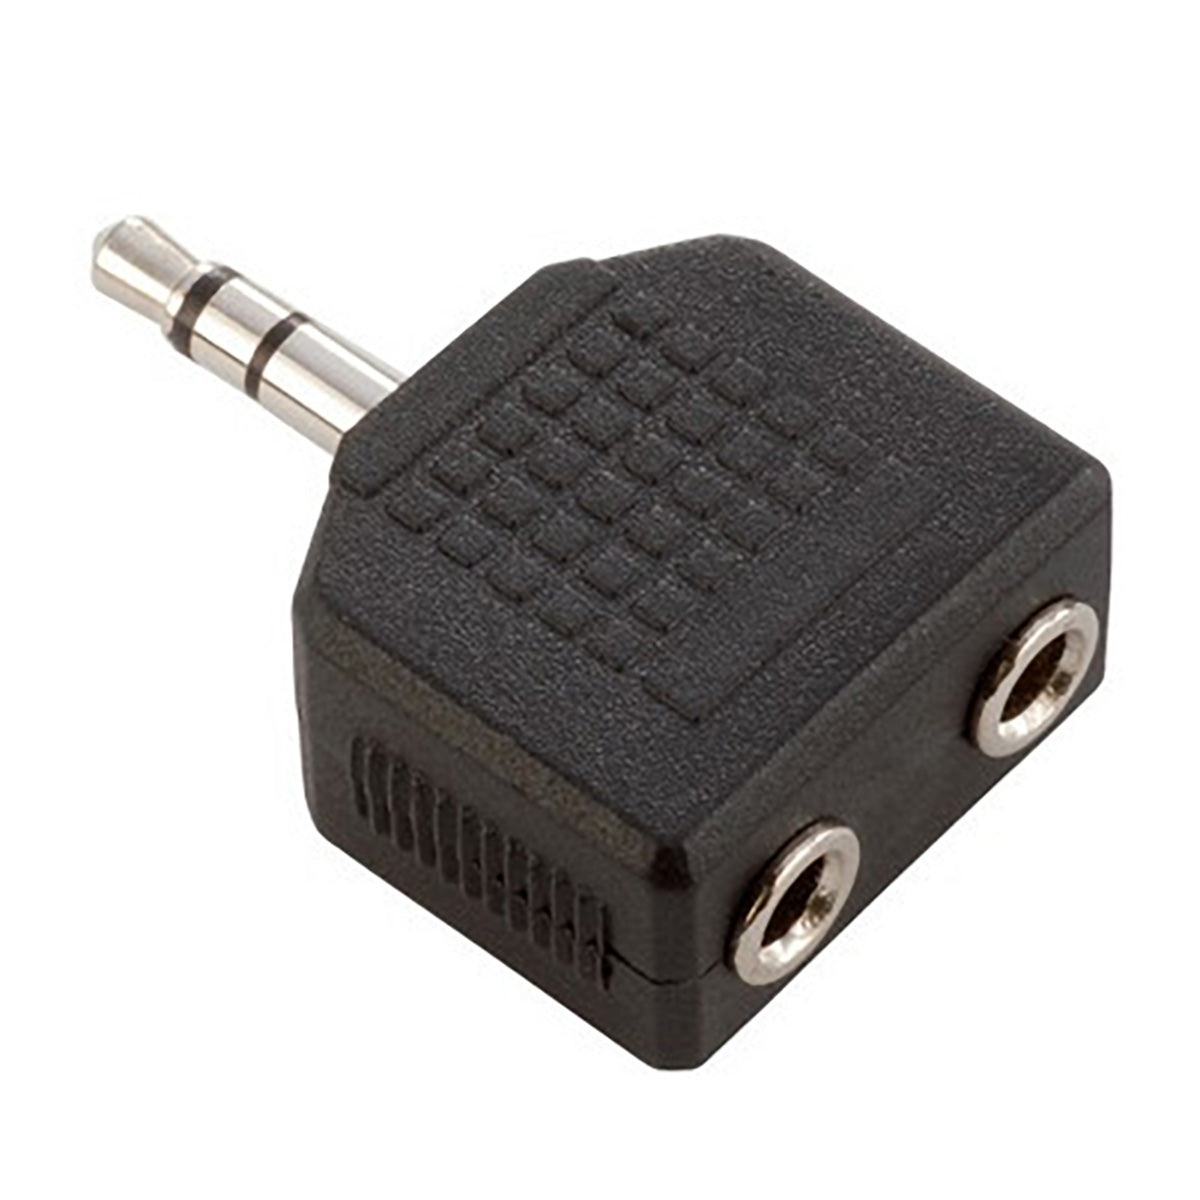 Adam Hall Connectors 7556 - Y-Adapter 2 x stereo Jack 3.5mm female to stereo Jack 3.5mm male